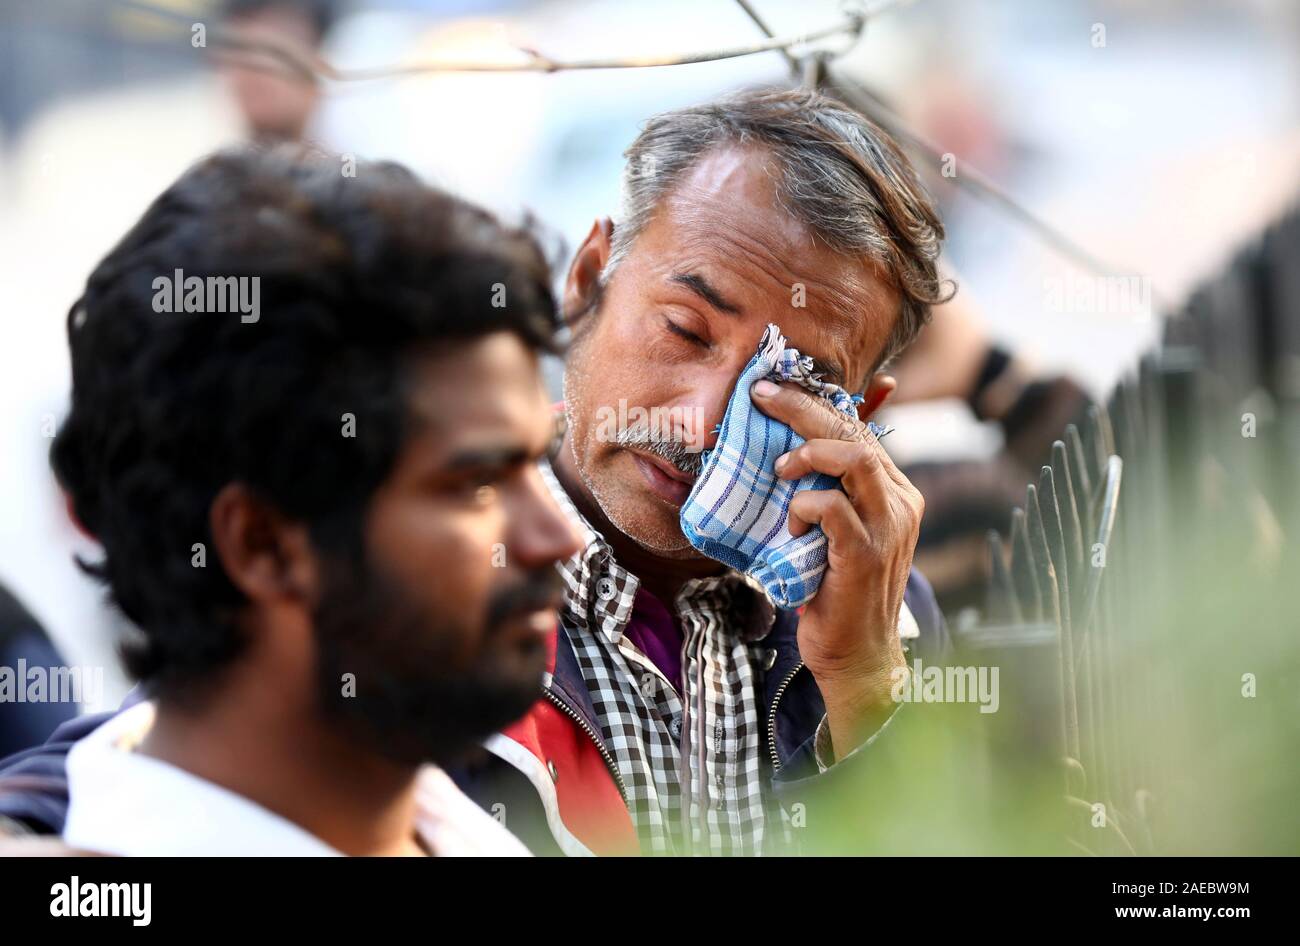 New Delhi, India. 8th Dec, 2019. Relatives of a fire victim wait at a hospital in New Delhi, India, Dec. 8, 2019. At least 43 people died and more than 50 injured in the fire incident. The injured are undergoing medical treatment at four different hospitals. The fire broke out in north Delhi's Filmistan area in the early hours of Sunday when more than 100 people, mostly labourers, were asleep inside a four-storey building. Credit: Str/Xinhua/Alamy Live News Stock Photo